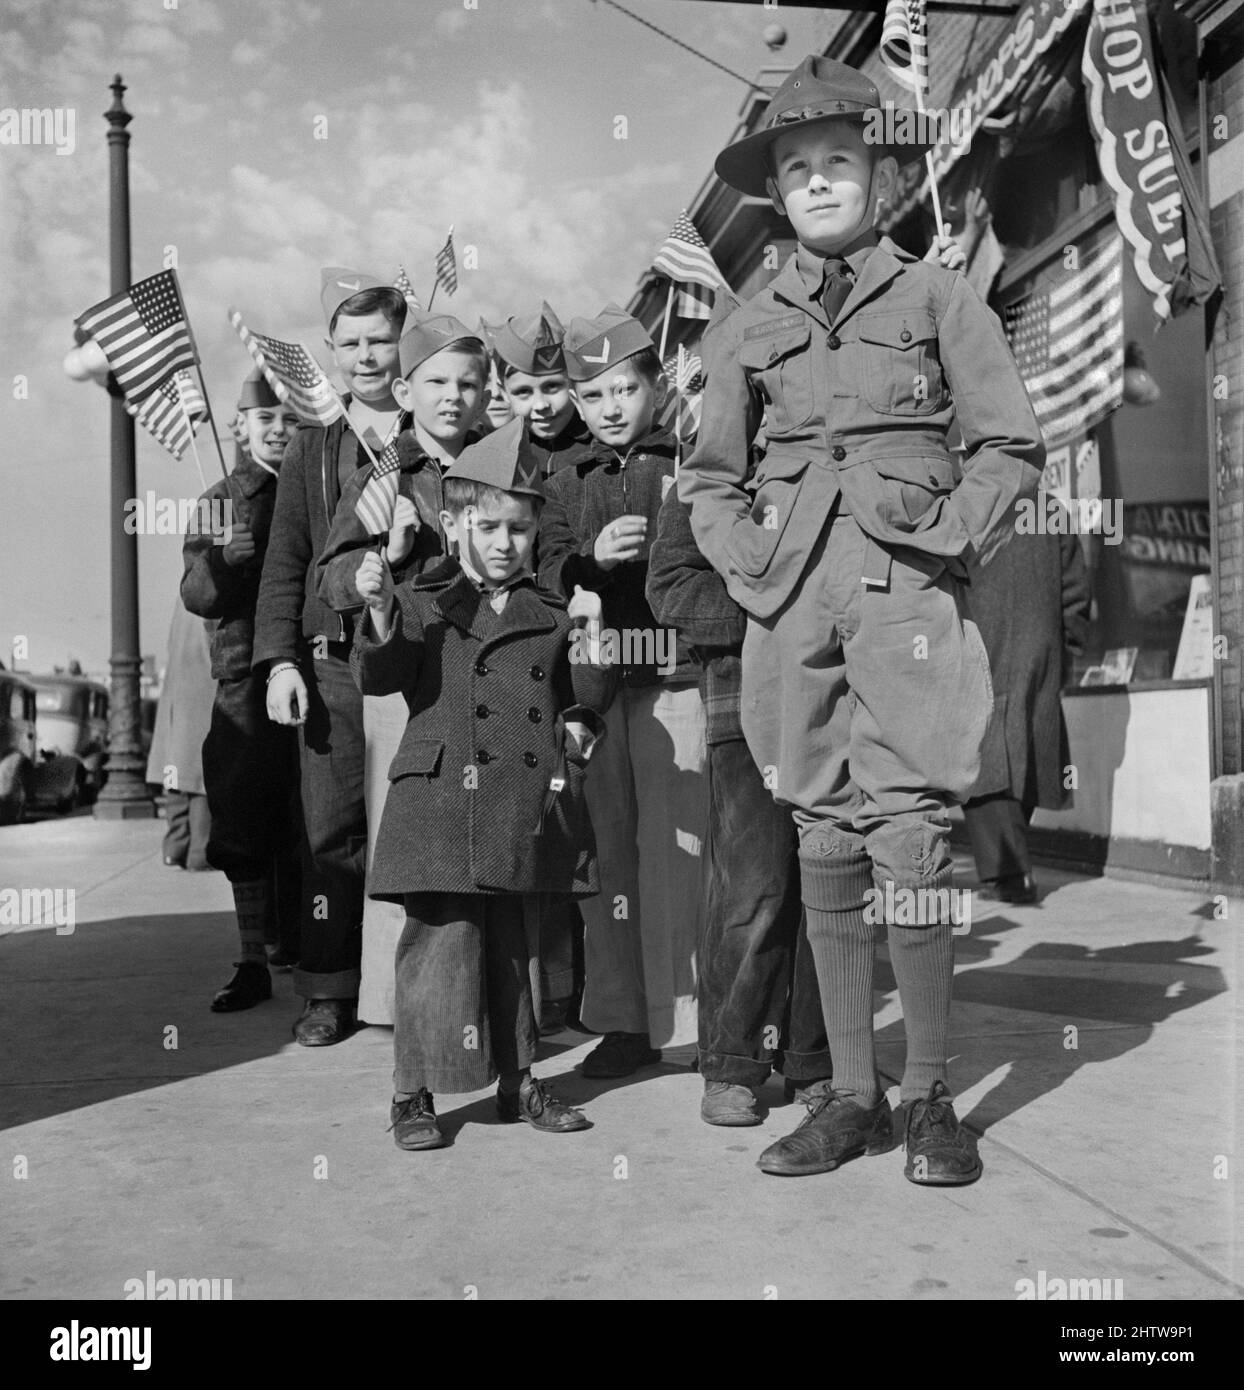 Boy Scout leading group of Young boys wearing garrison caps and holding American Flags at start of Parade and Flag Dedication Ceremony at Office of Civil Defense Headquarters, Chicago, Illinois, USA, Jack Delano, U.S. Office of War Information/U.S. Farm Security Administration, November 11, 1942 Stock Photo